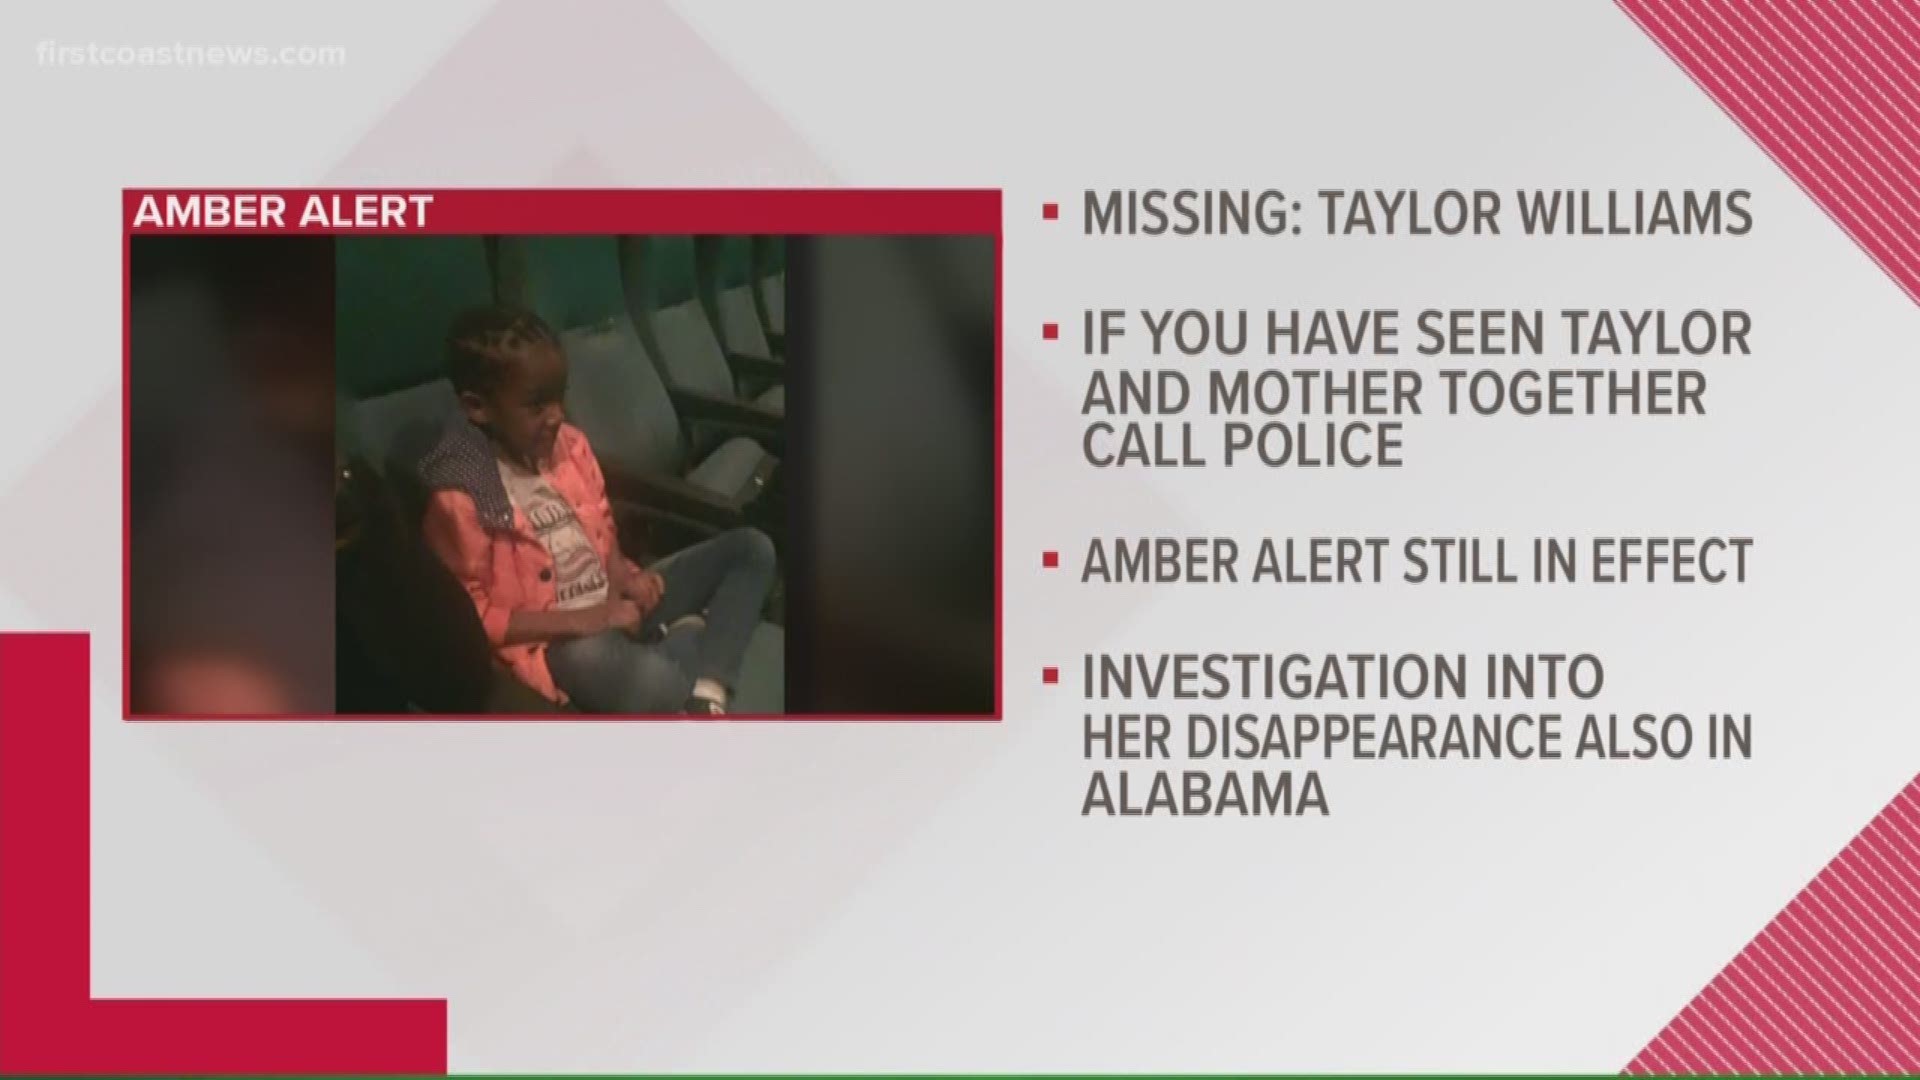 Taylor Williams, 5, was last seen in her home in the 600 block of Ivy Street early Wednesday morning wearing a purple shirt, pink pajama pants and no shoes.